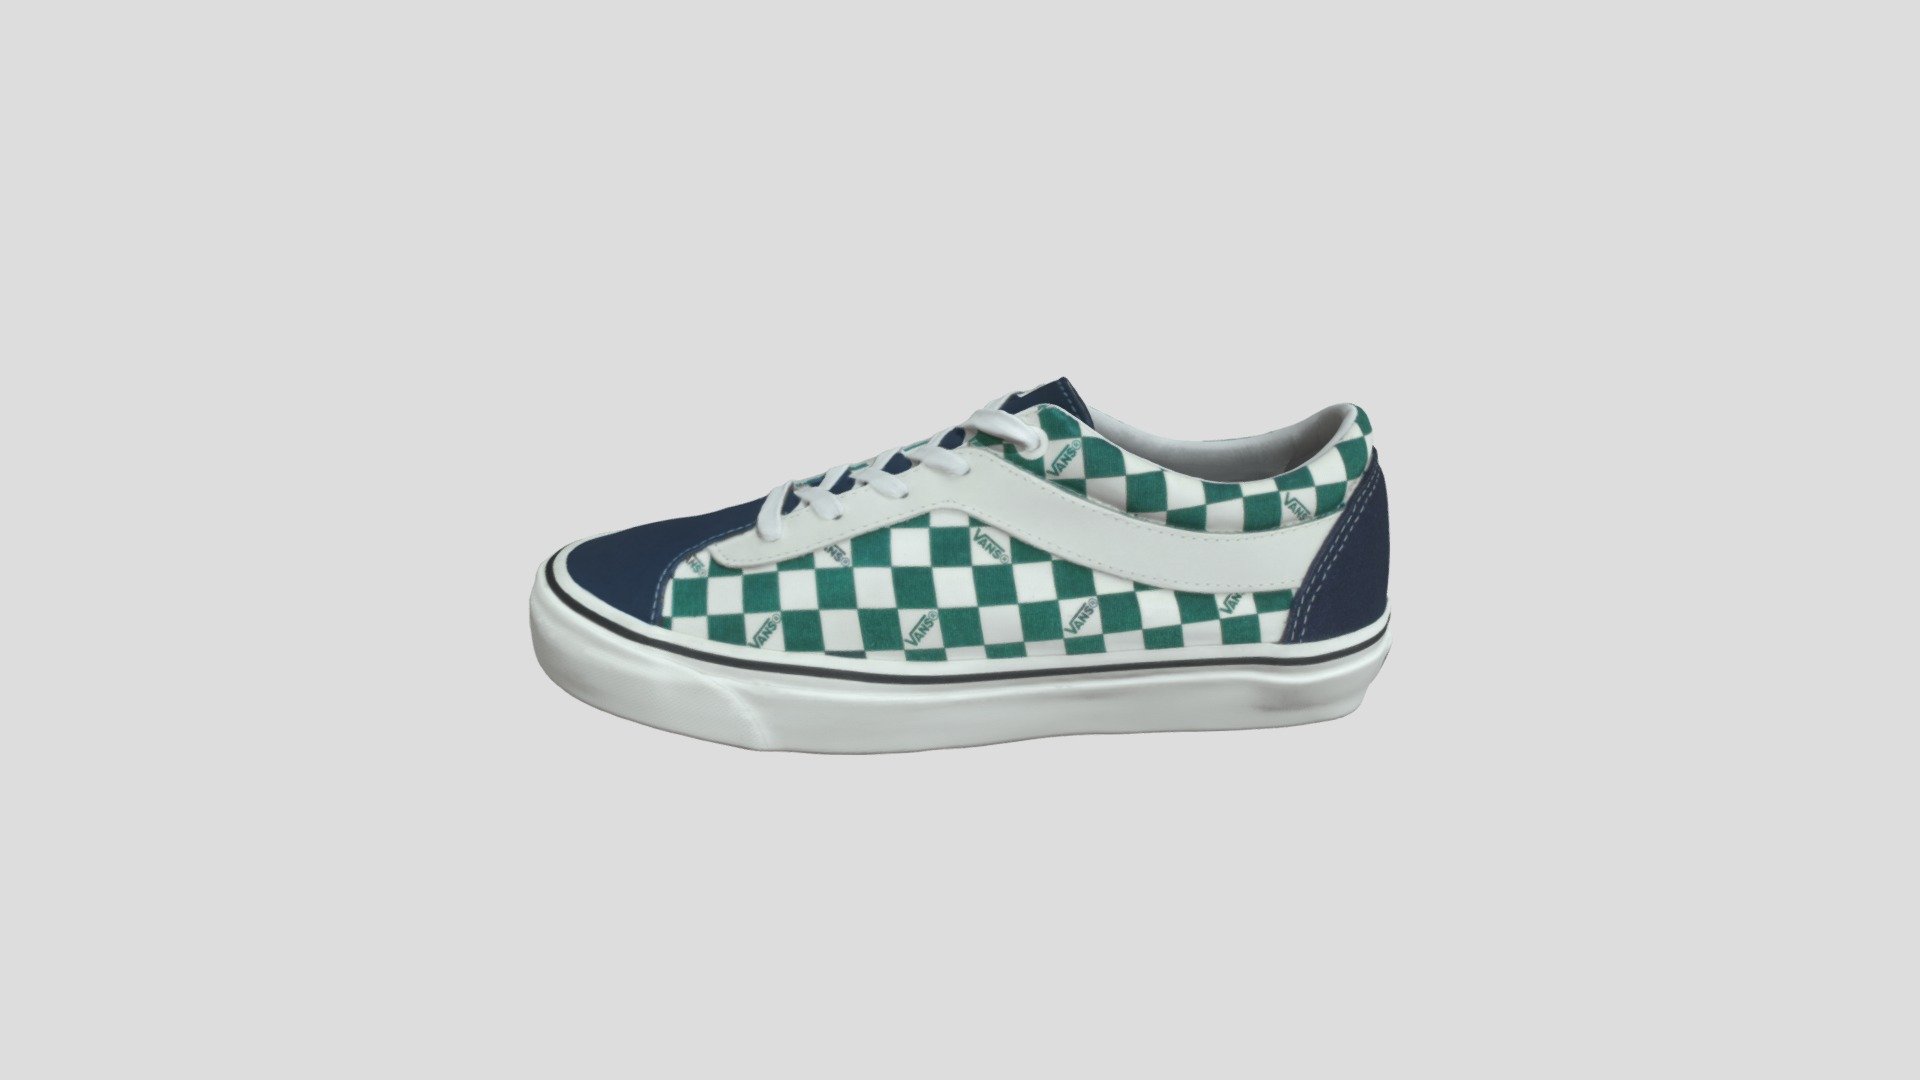 This model was created firstly by 3D scanning on retail version, and then being detail-improved manually, thus a 1:1 repulica of the original
PBR ready
Low-poly
4K texture
Welcome to check out other models we have to offer. And we do accept custom orders as well :) - Vans Bold Ni 绿白棋盘_VN0A3WLP5E1 - Buy Royalty Free 3D model by TRARGUS 3d model